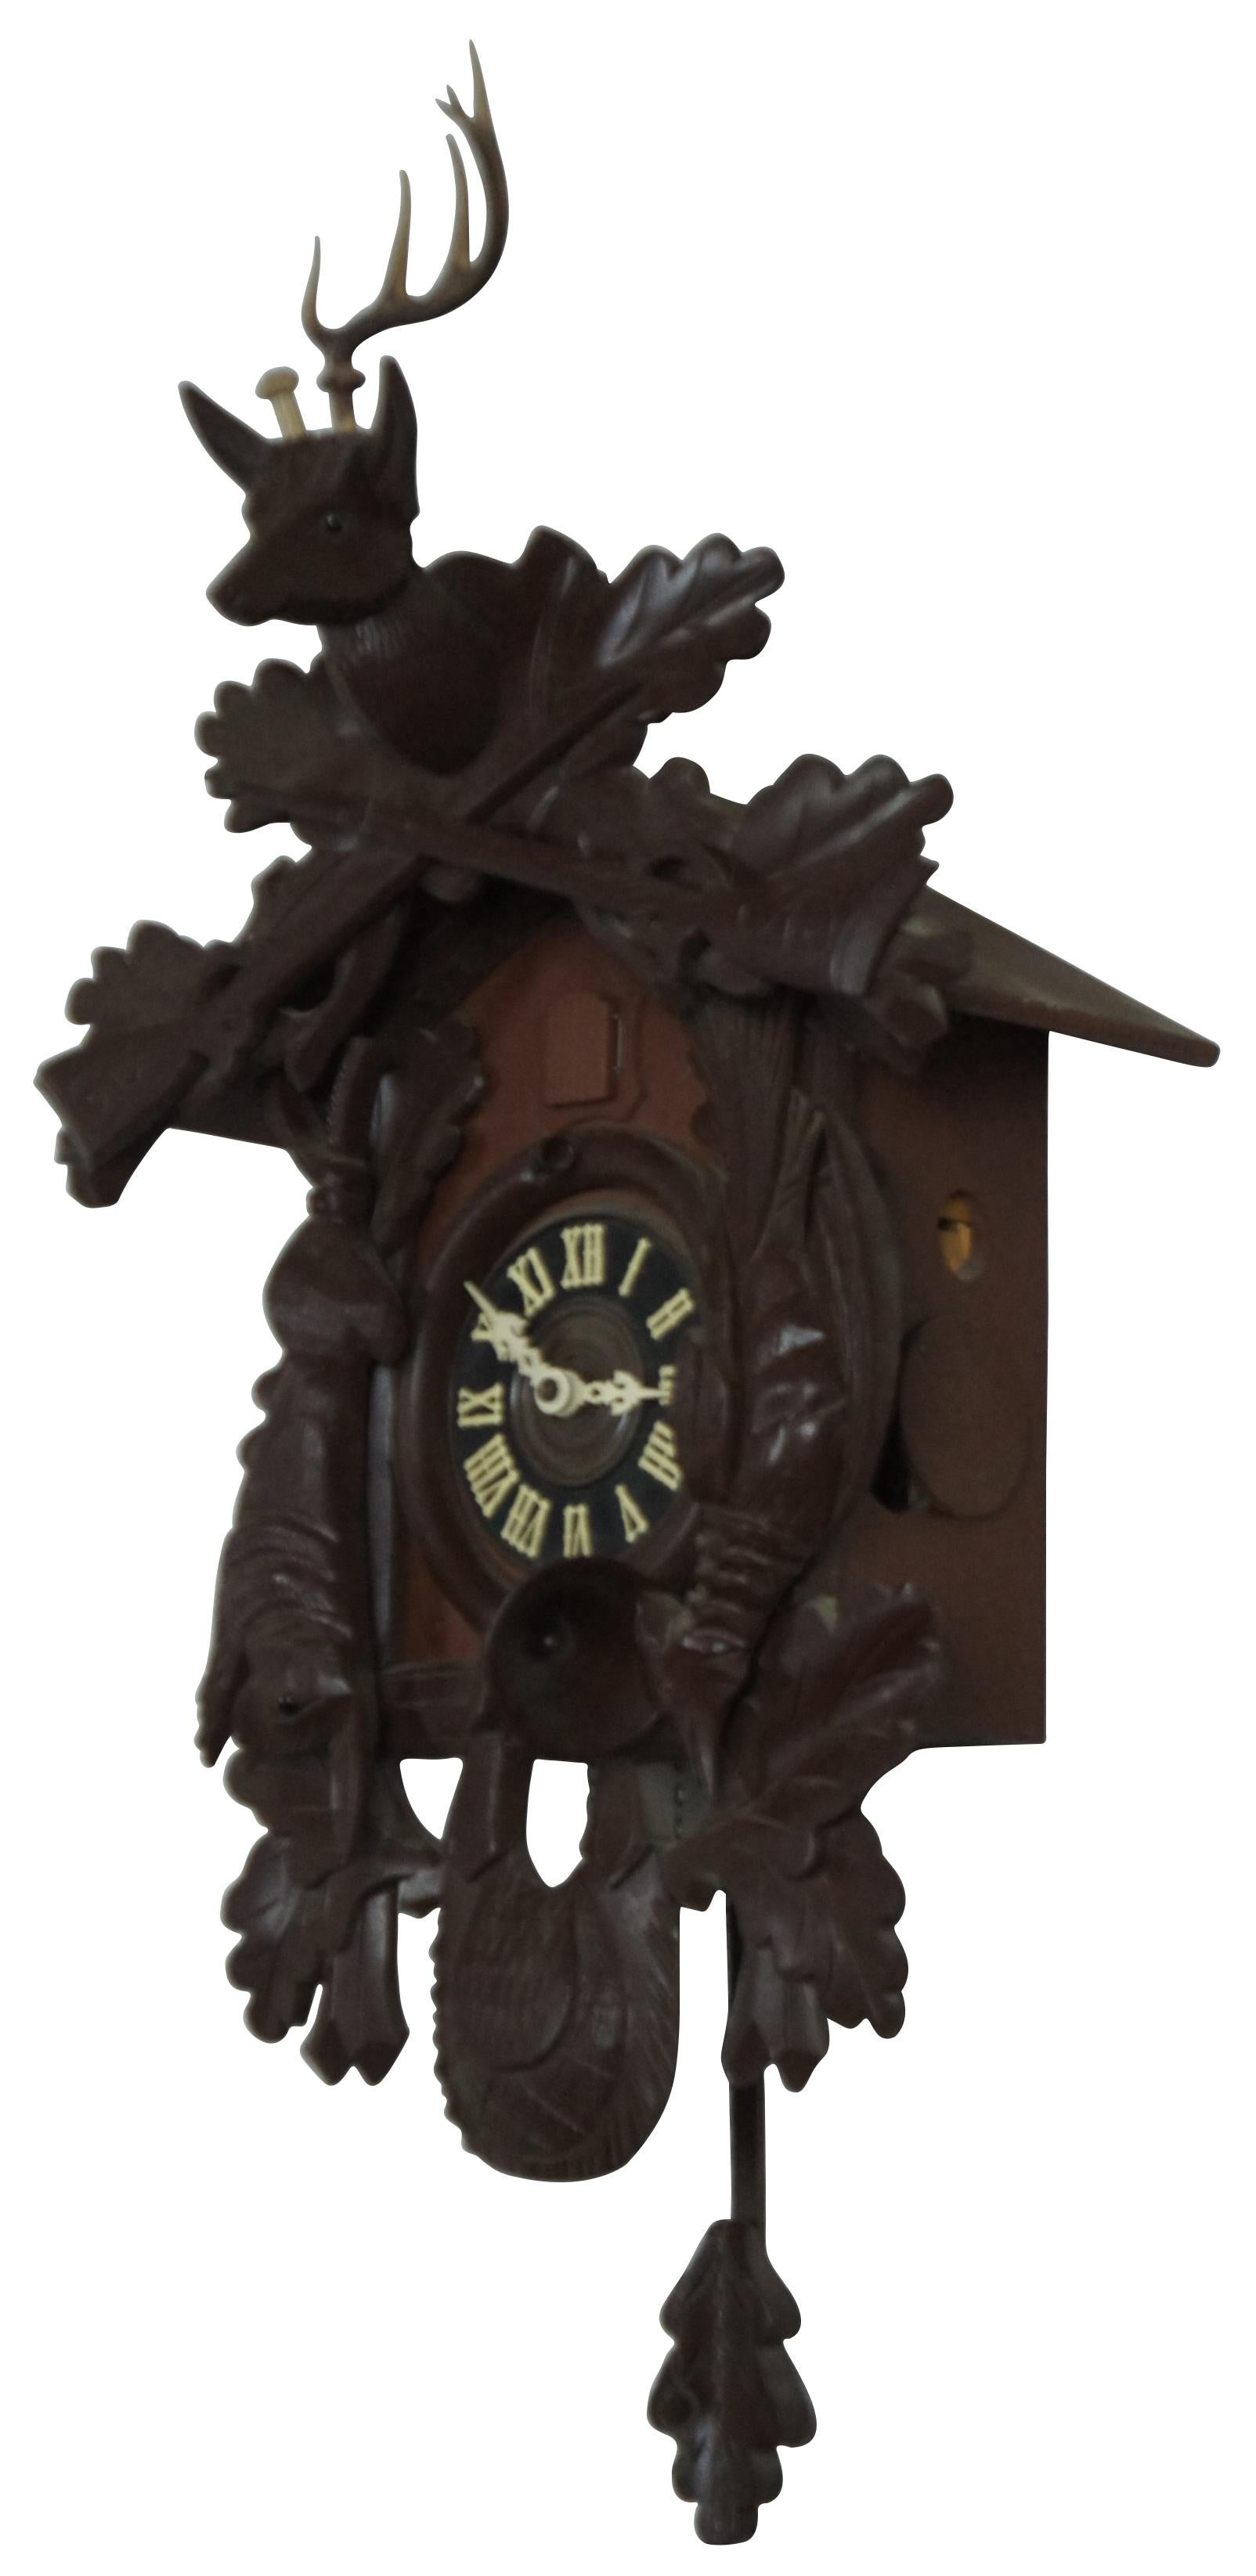 Vintage German black forest cuckoo clock with Regula works, decorated in a hunting motif featuring a game bag, forest leaves, rabbit, bird, two guns, deer head, white and blue cuckoo, and a leaf shaped pendulum. Includes two pine cone shaped